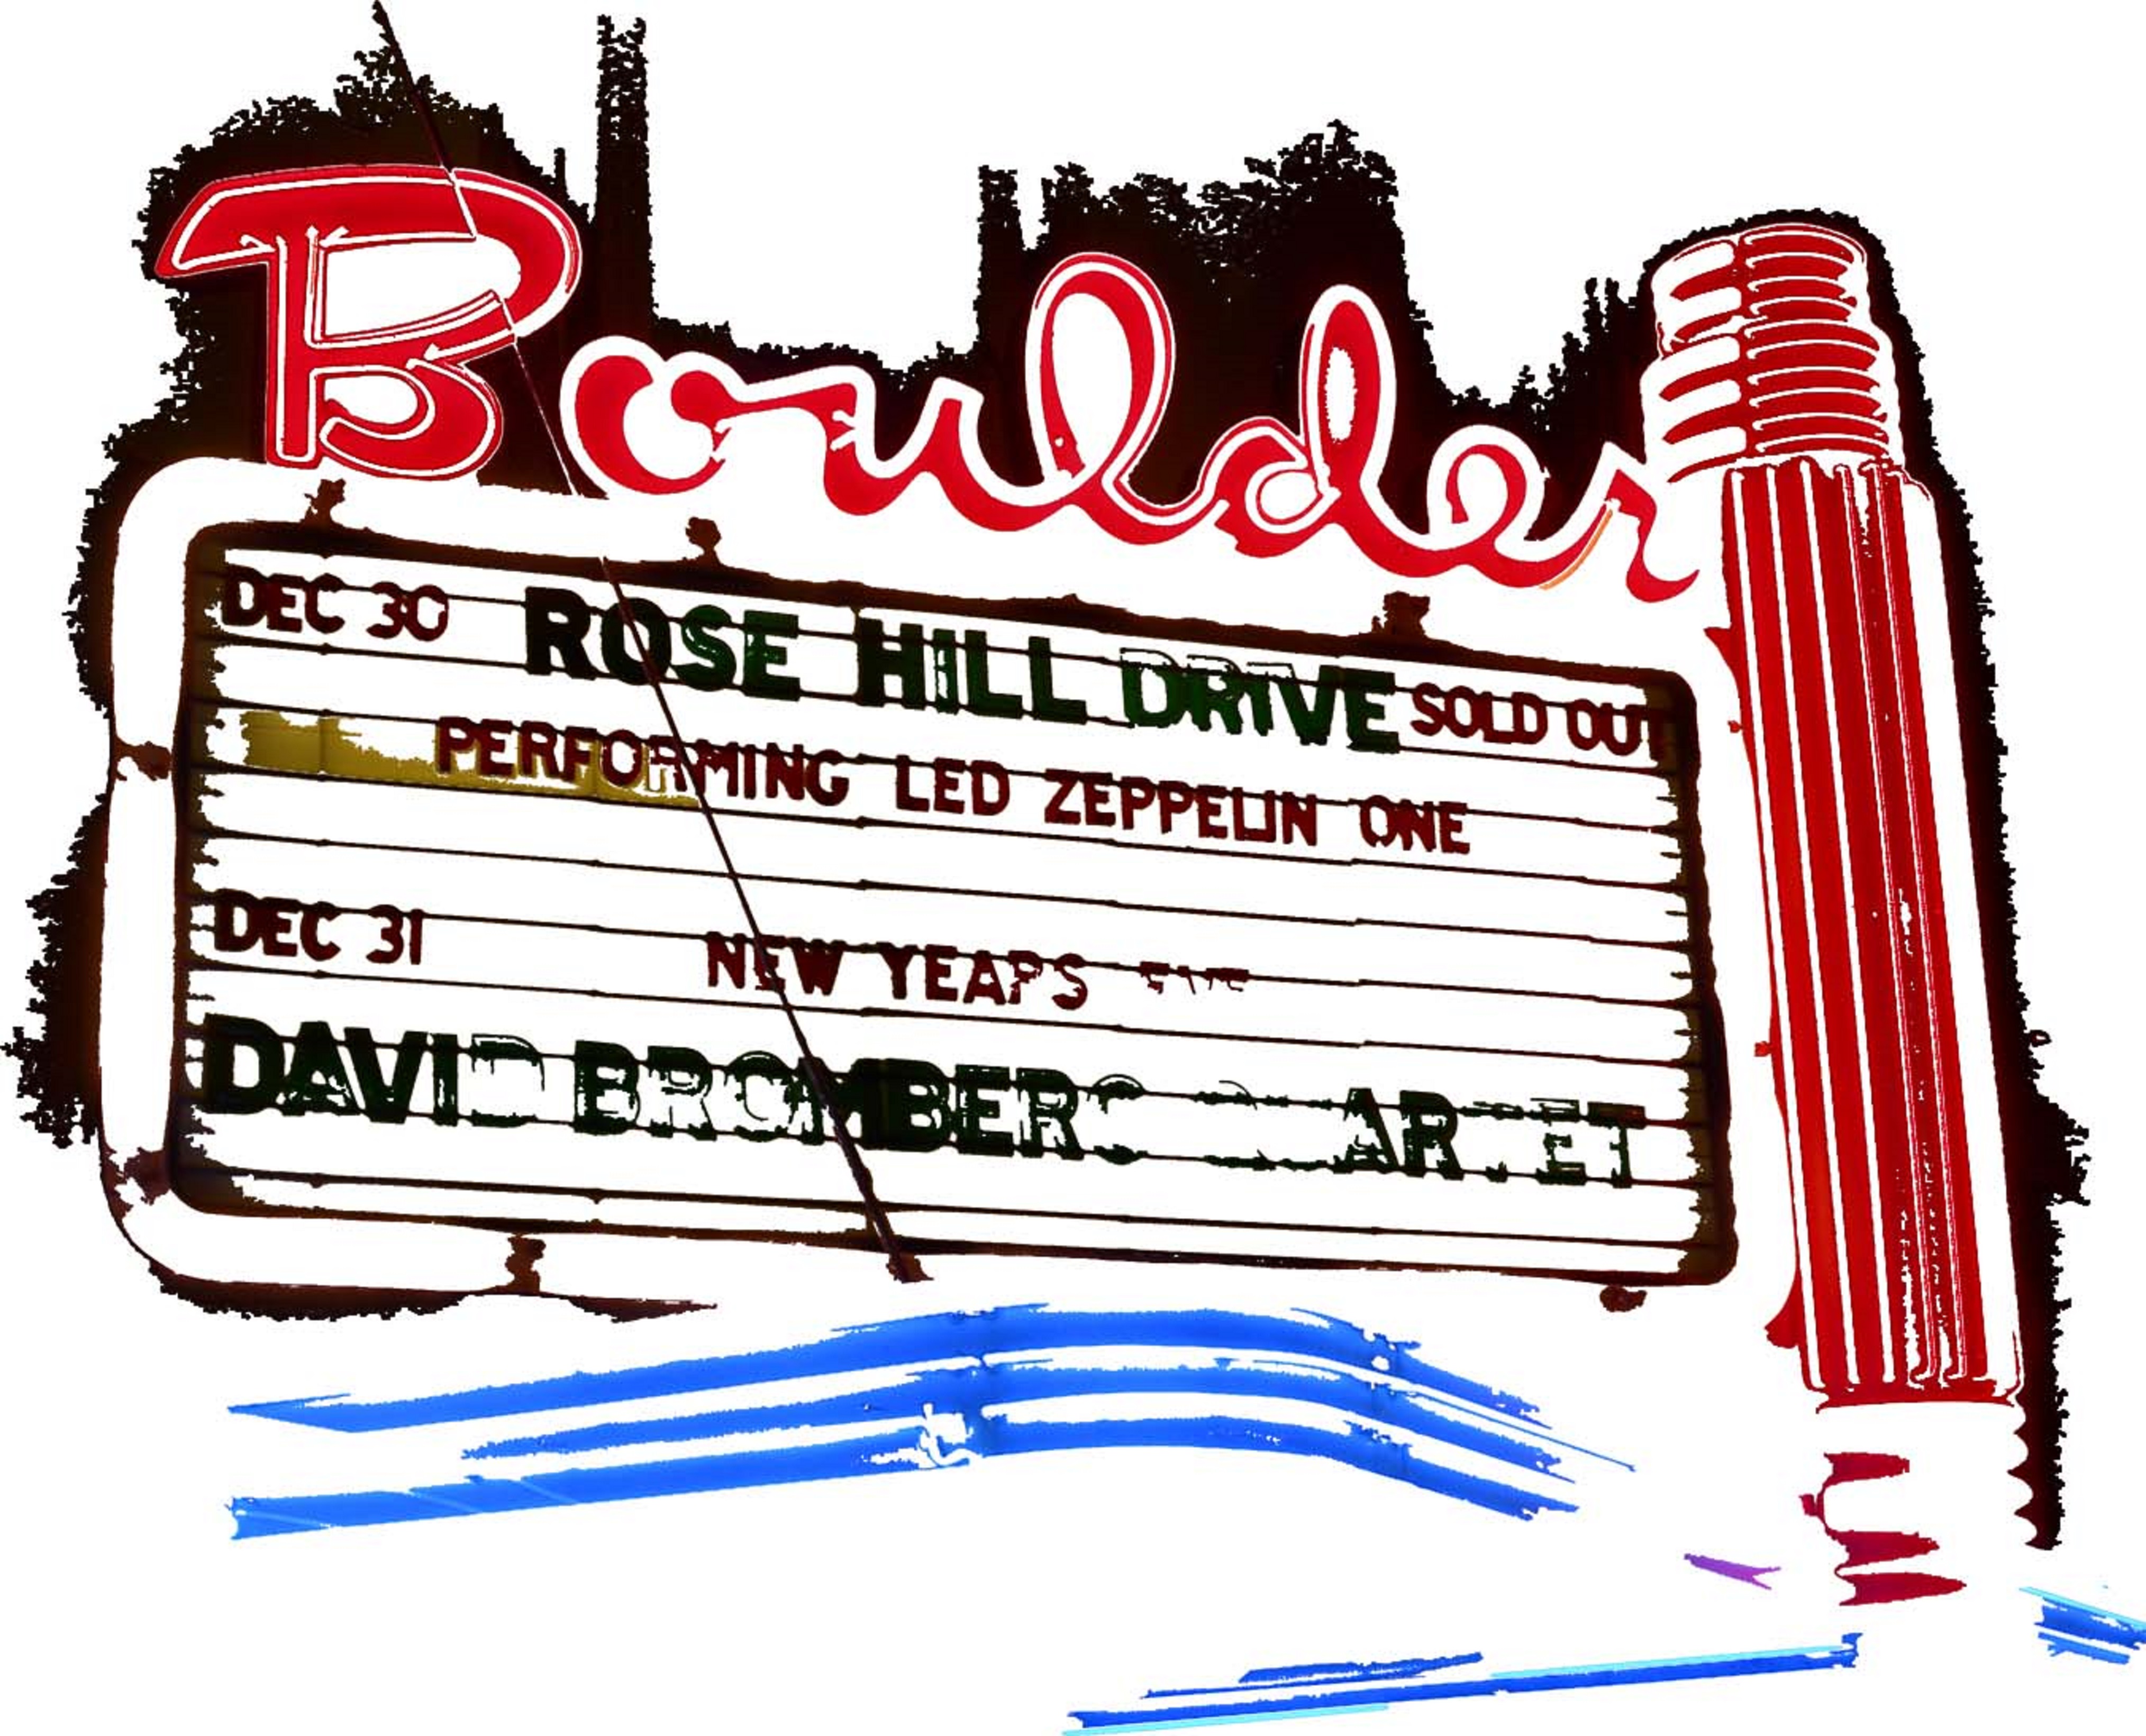 Good Times Bad Times: Rose Hill Drive Does Zeppelin I